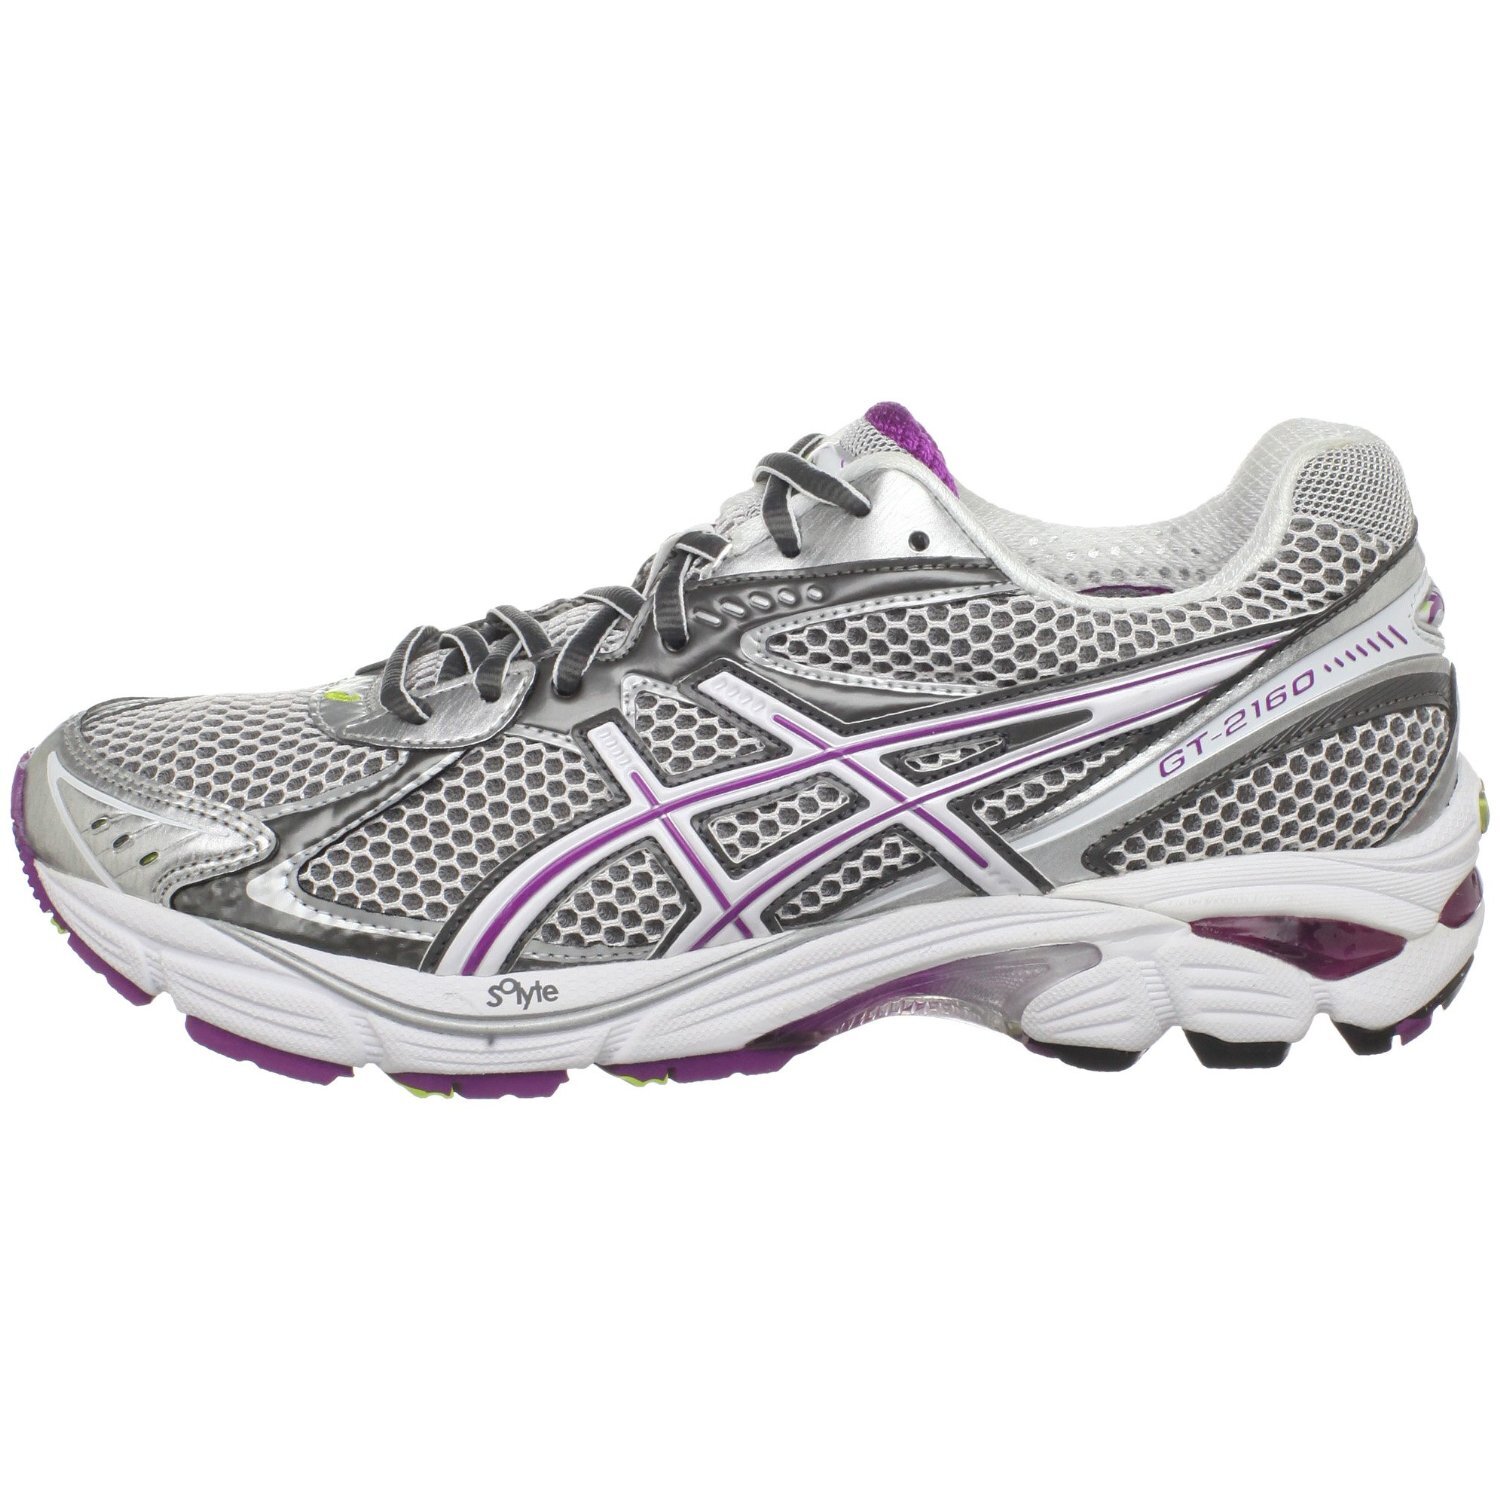 ASICS GT-2160 Running Shoes in Carbon/White/Plum — UFO No More